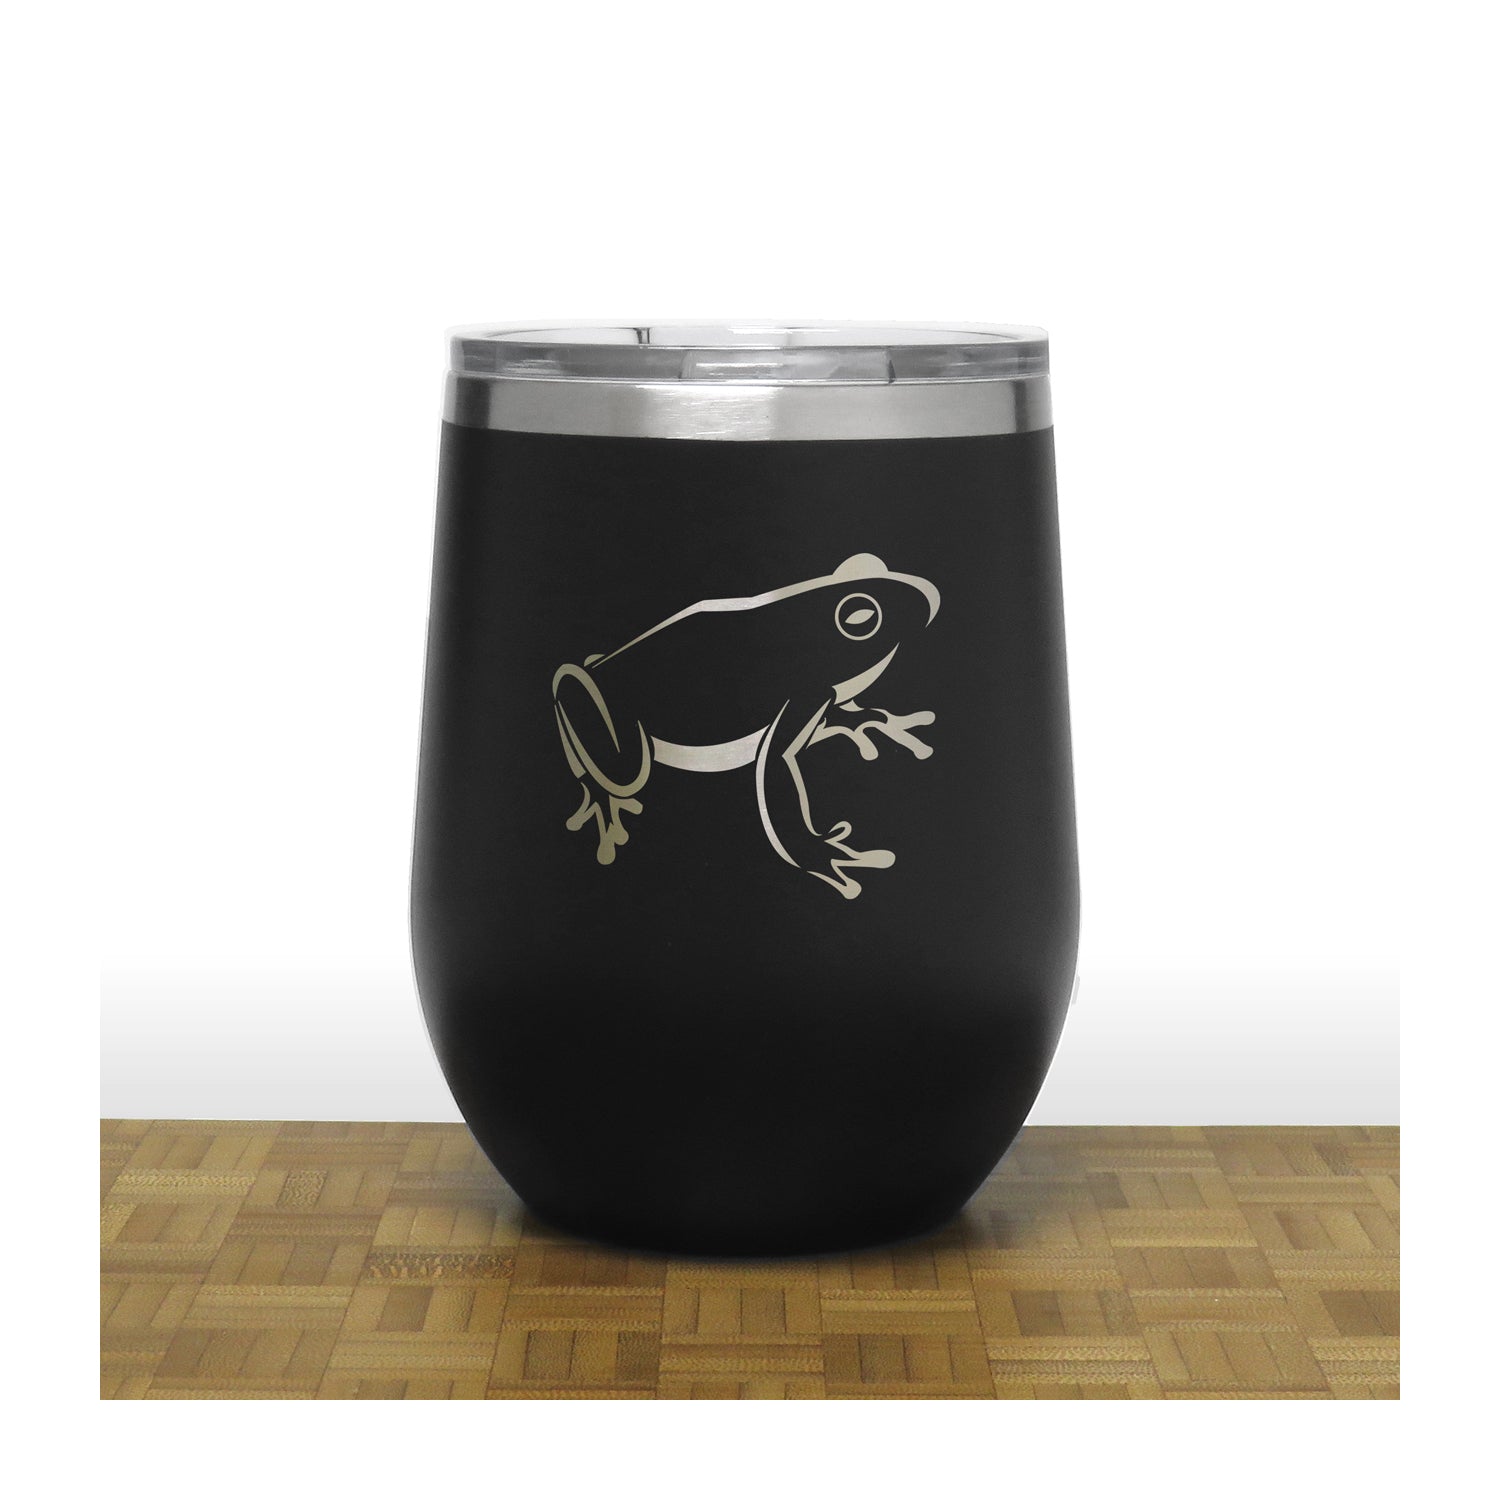 Black - Sitting Frog PC 12oz STEMLESS WINE - Copyright Hues in Glass